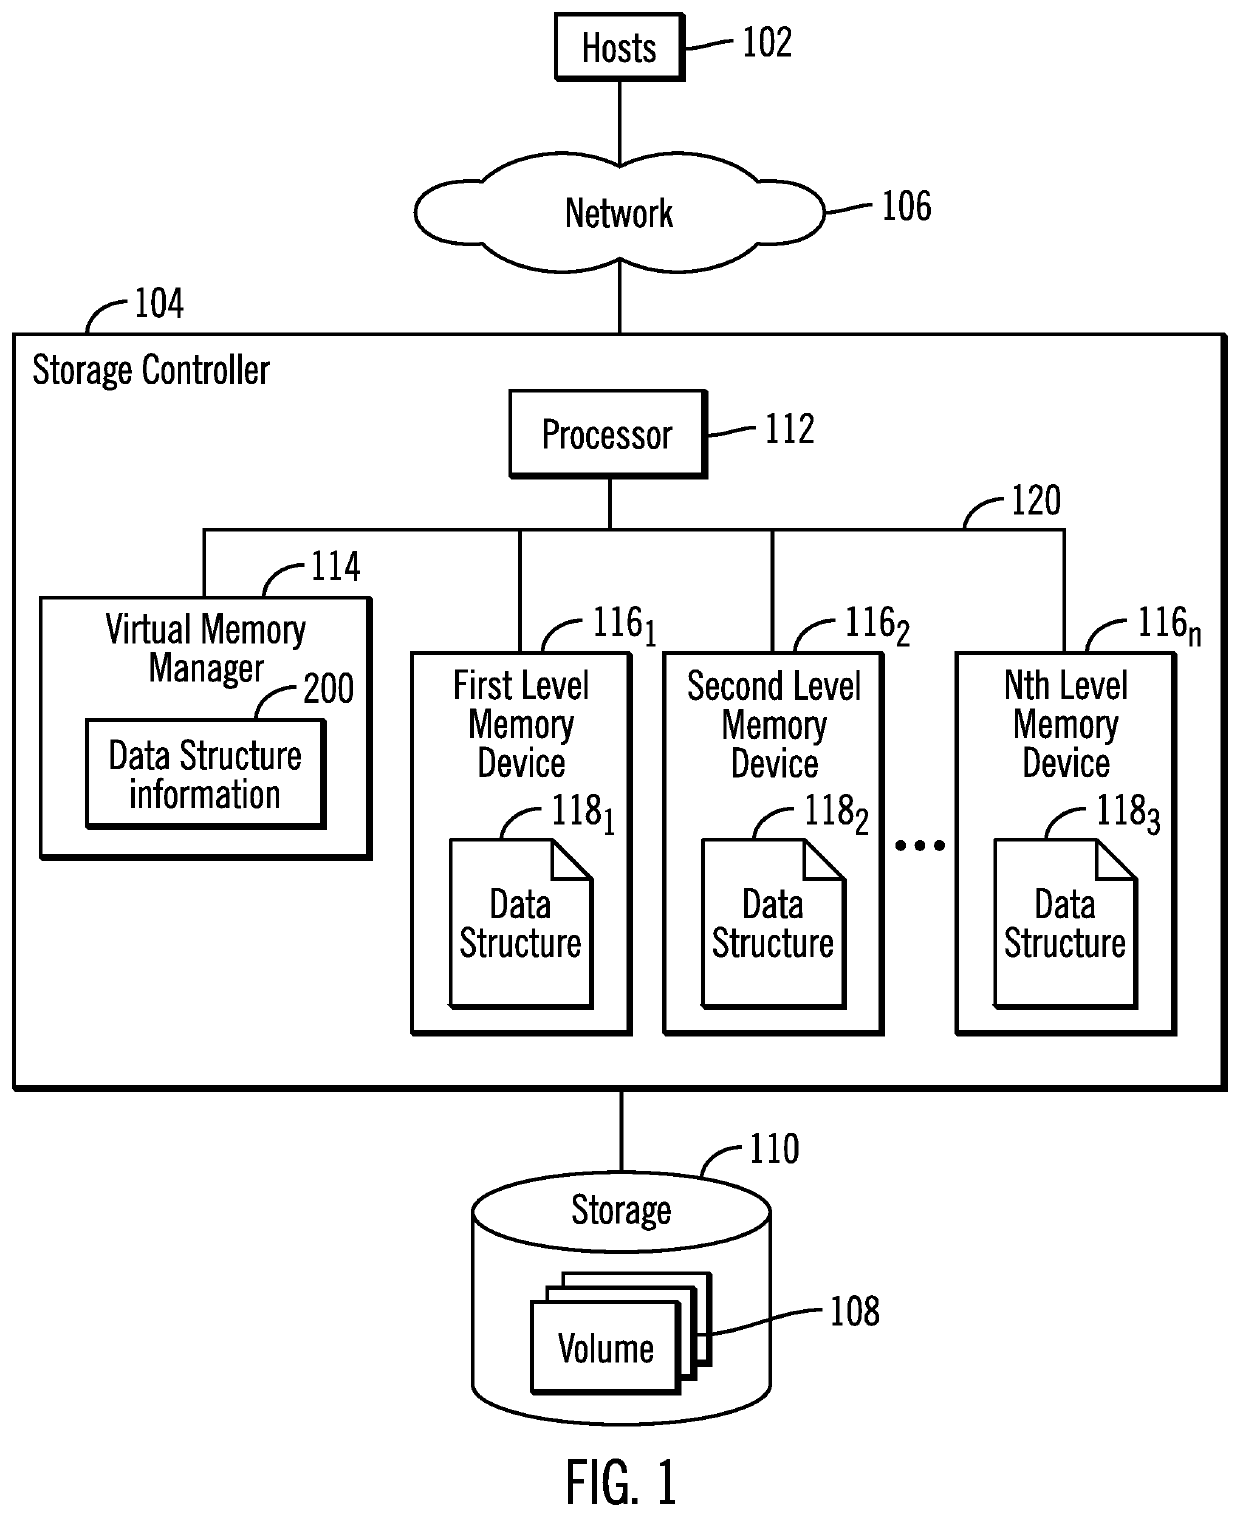 Managing swappable data structures in a plurality of memory devices based on access counts of the data structures